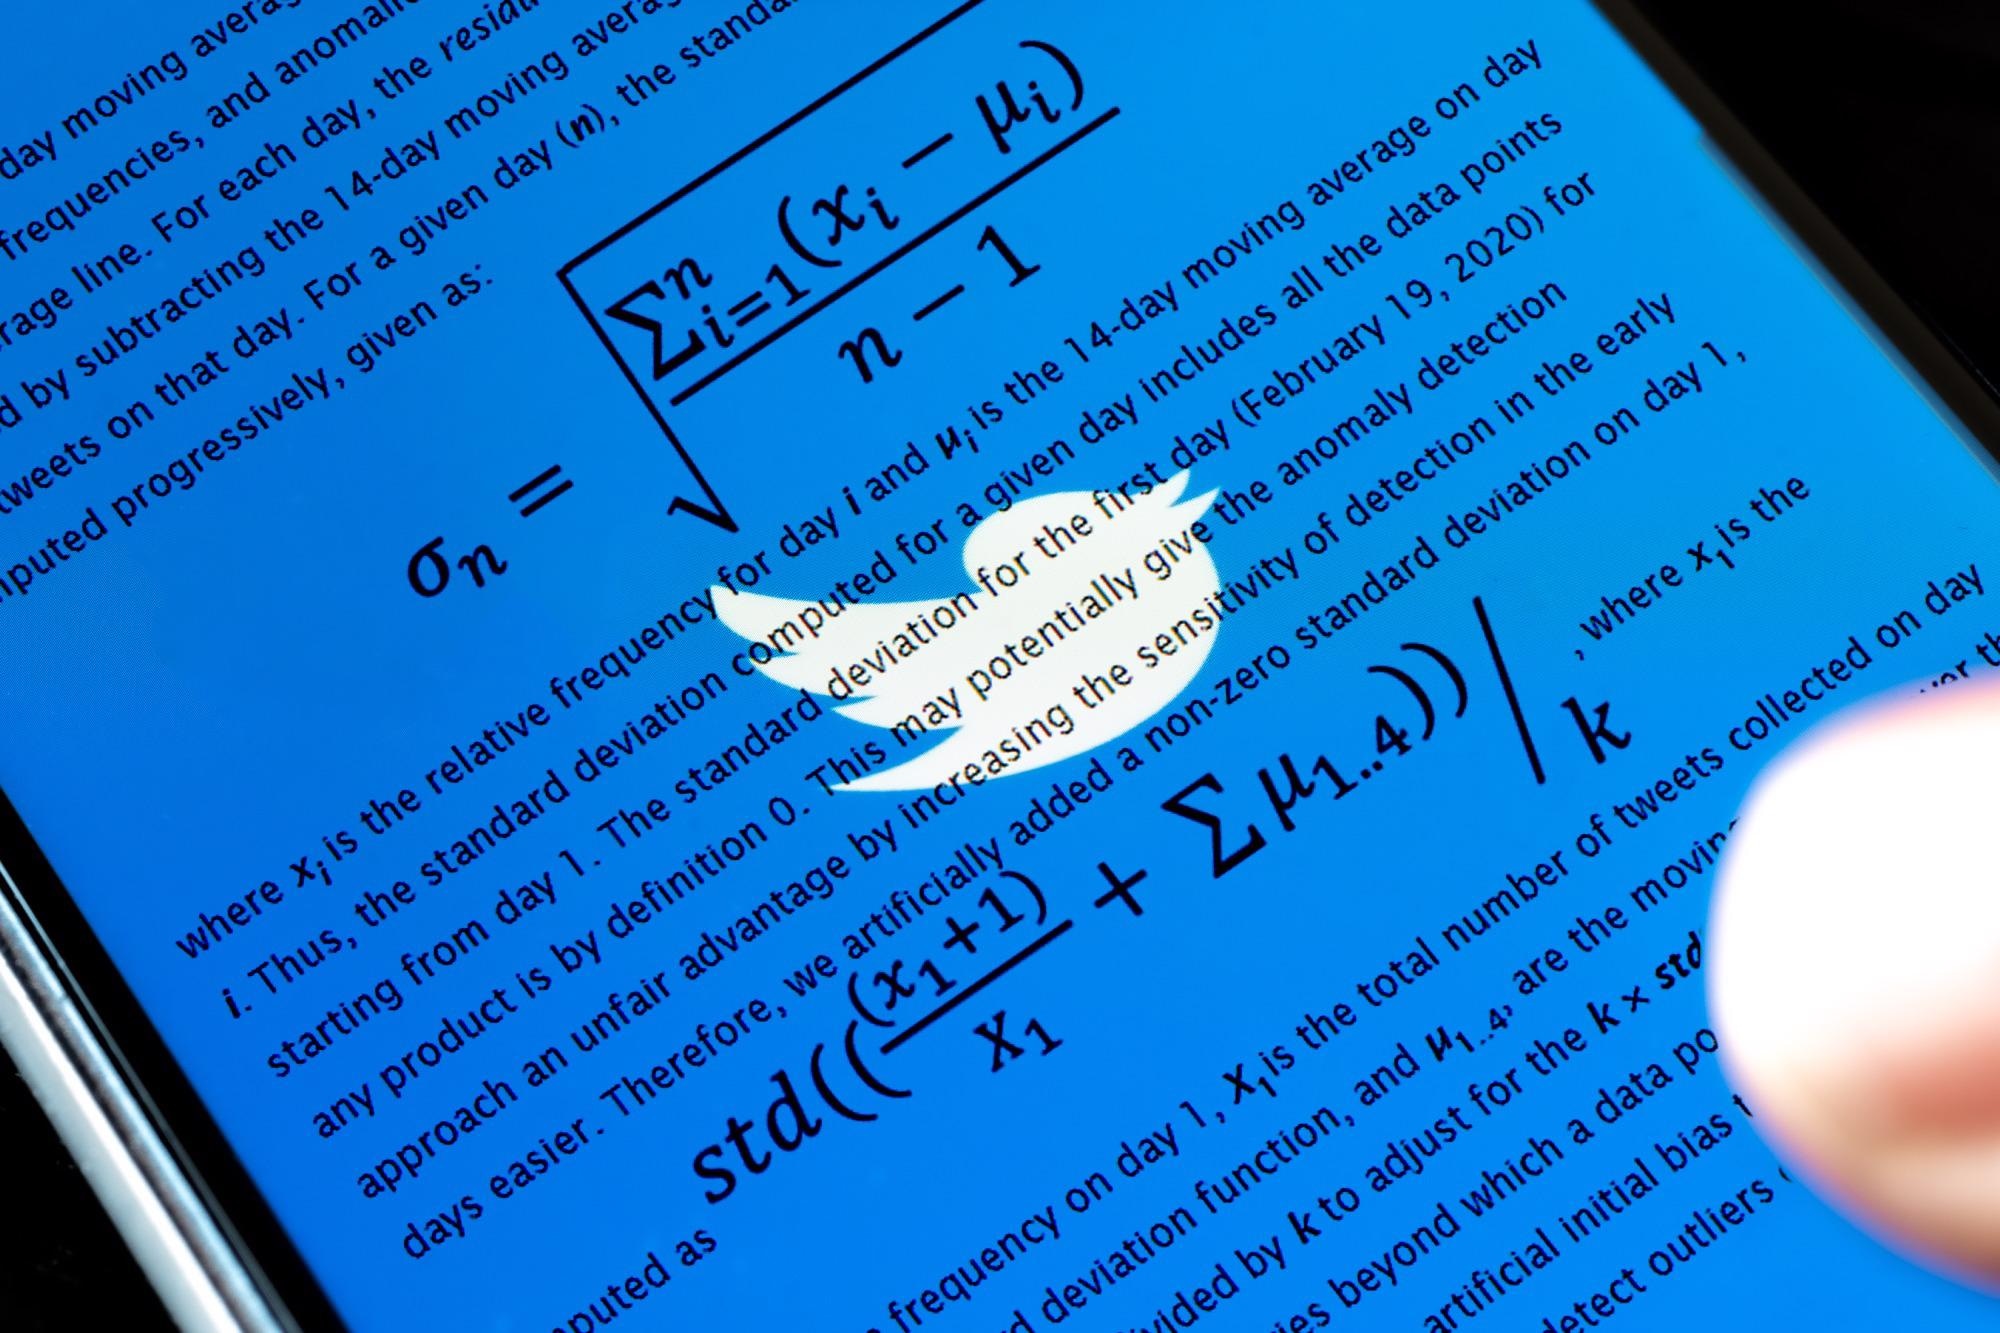 Study: Early detection of fraudulent COVID-19 products from Twitter chatter. Image Credit: Michele Ursi / Shutterstock